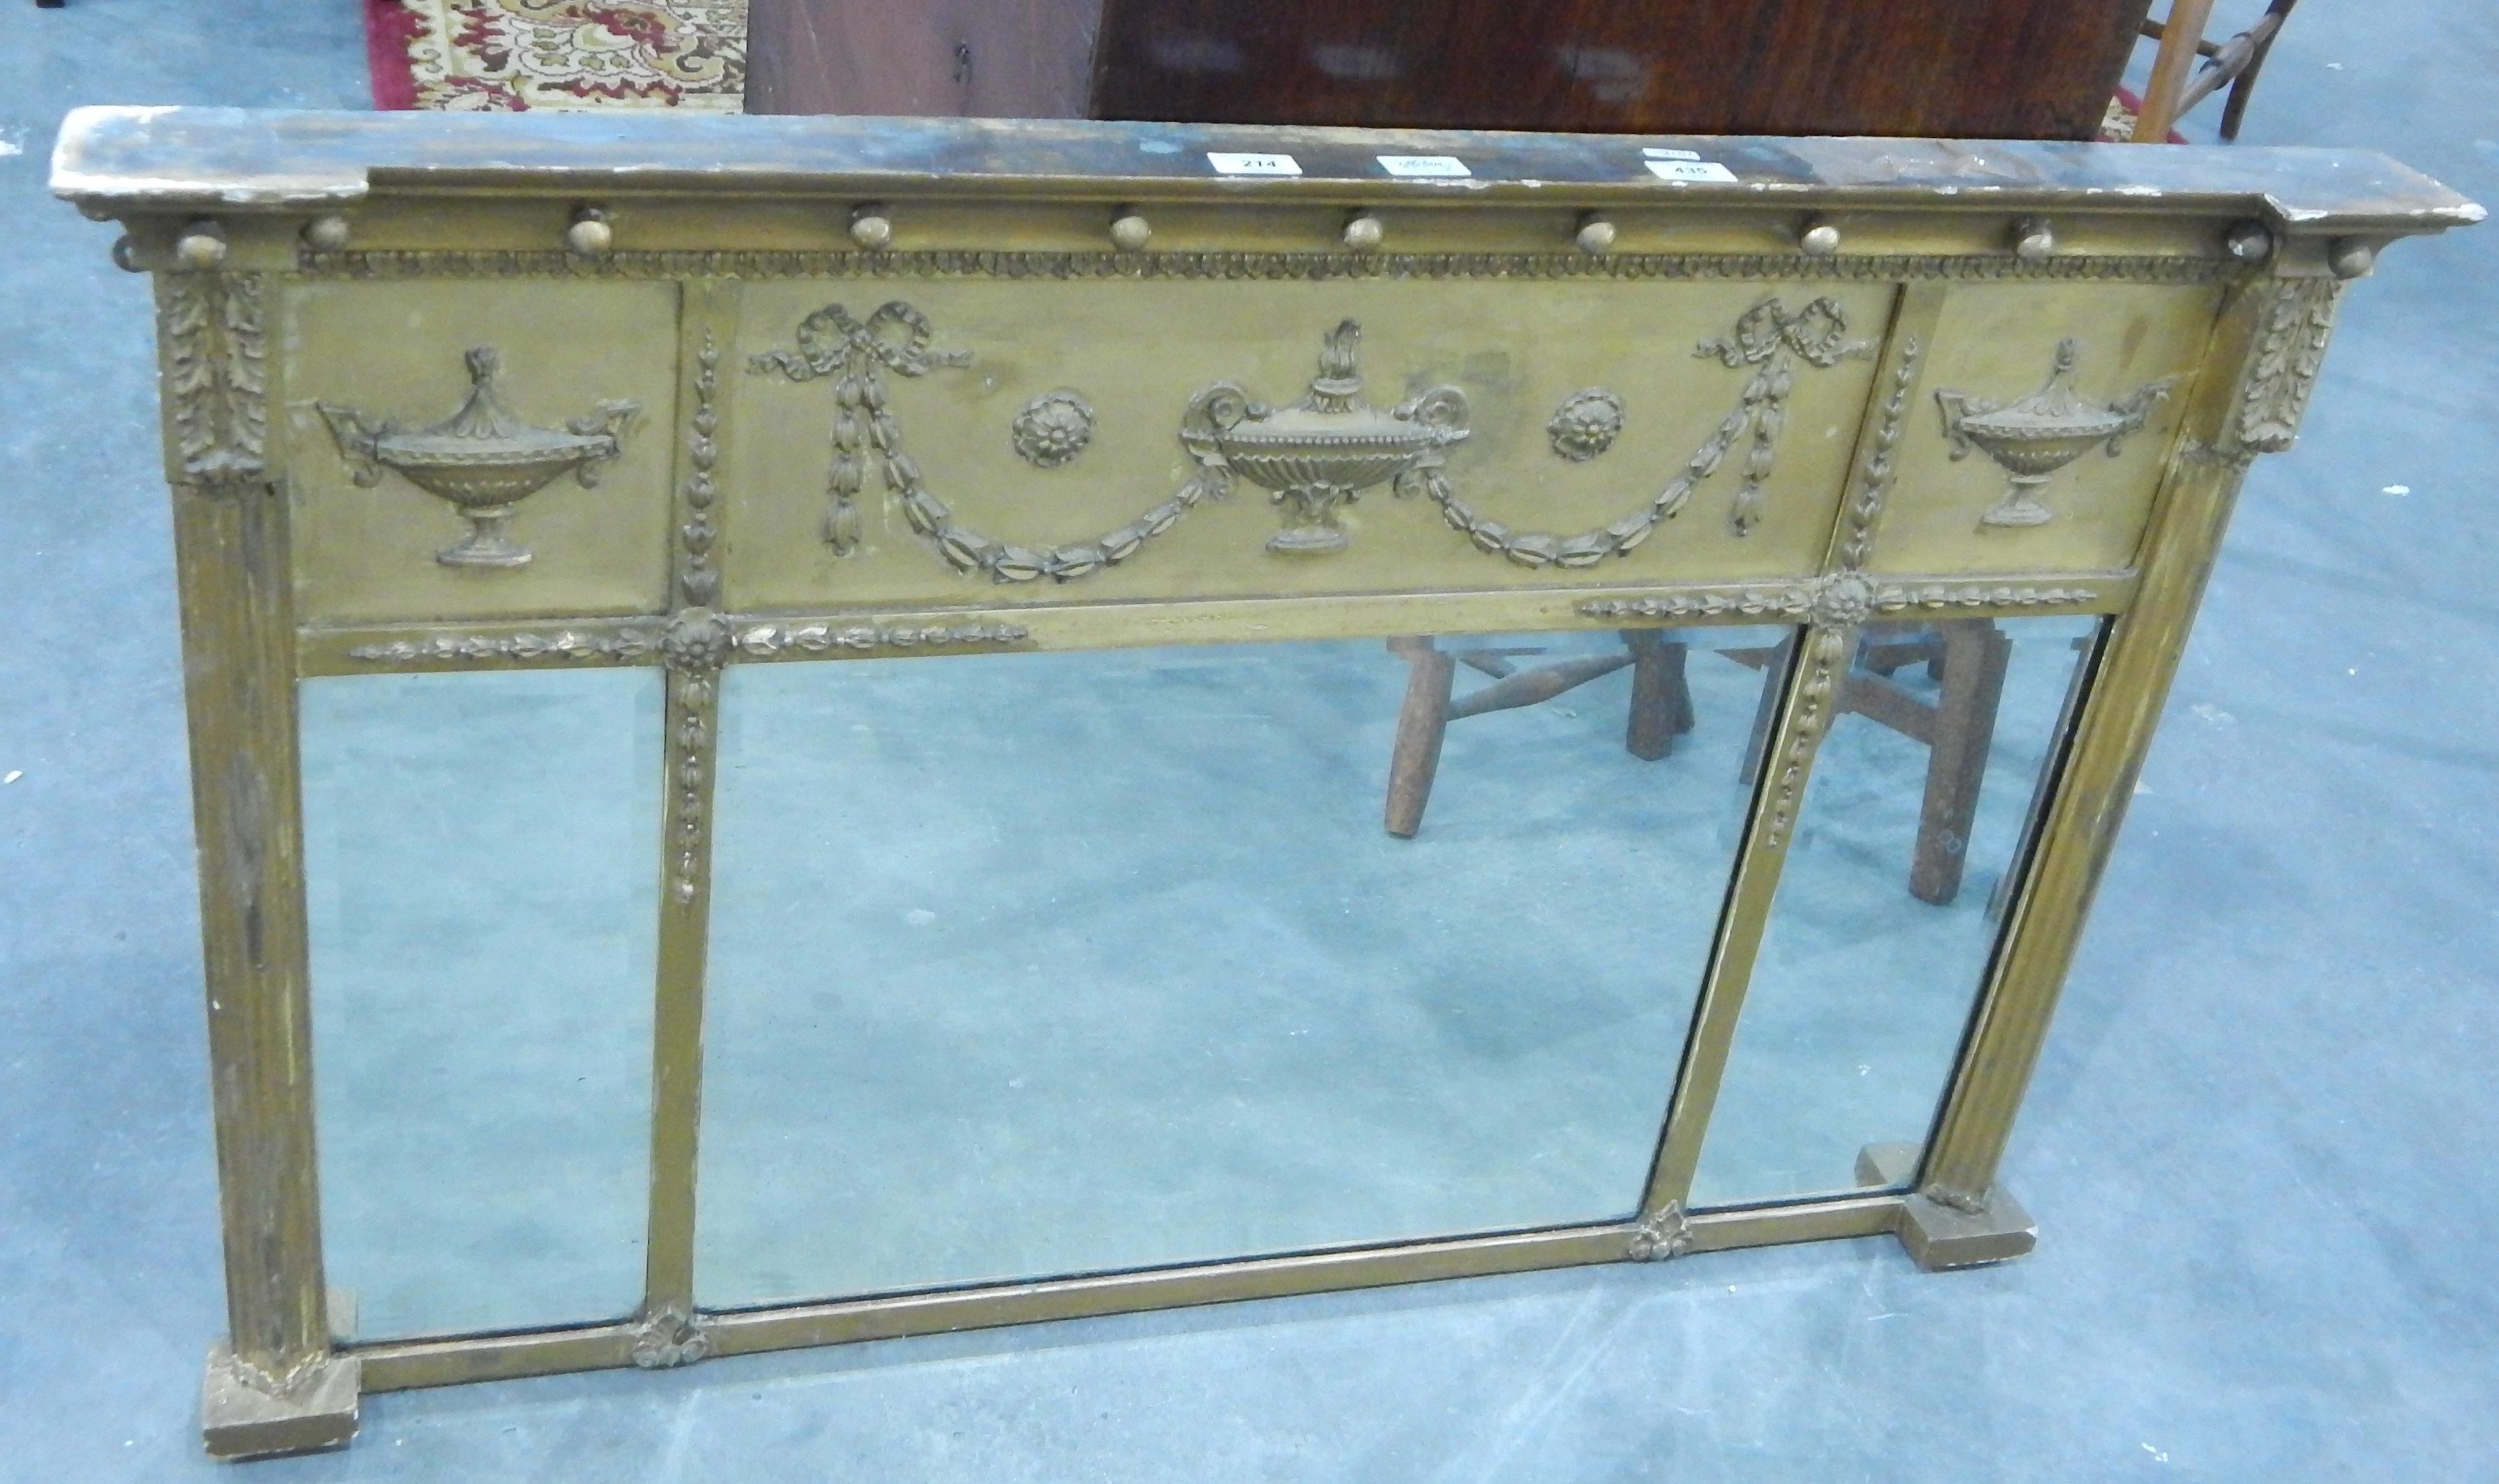 A rectangular gilt Regency style mirror with urn and swag decoration, with "Jones & Higgins,